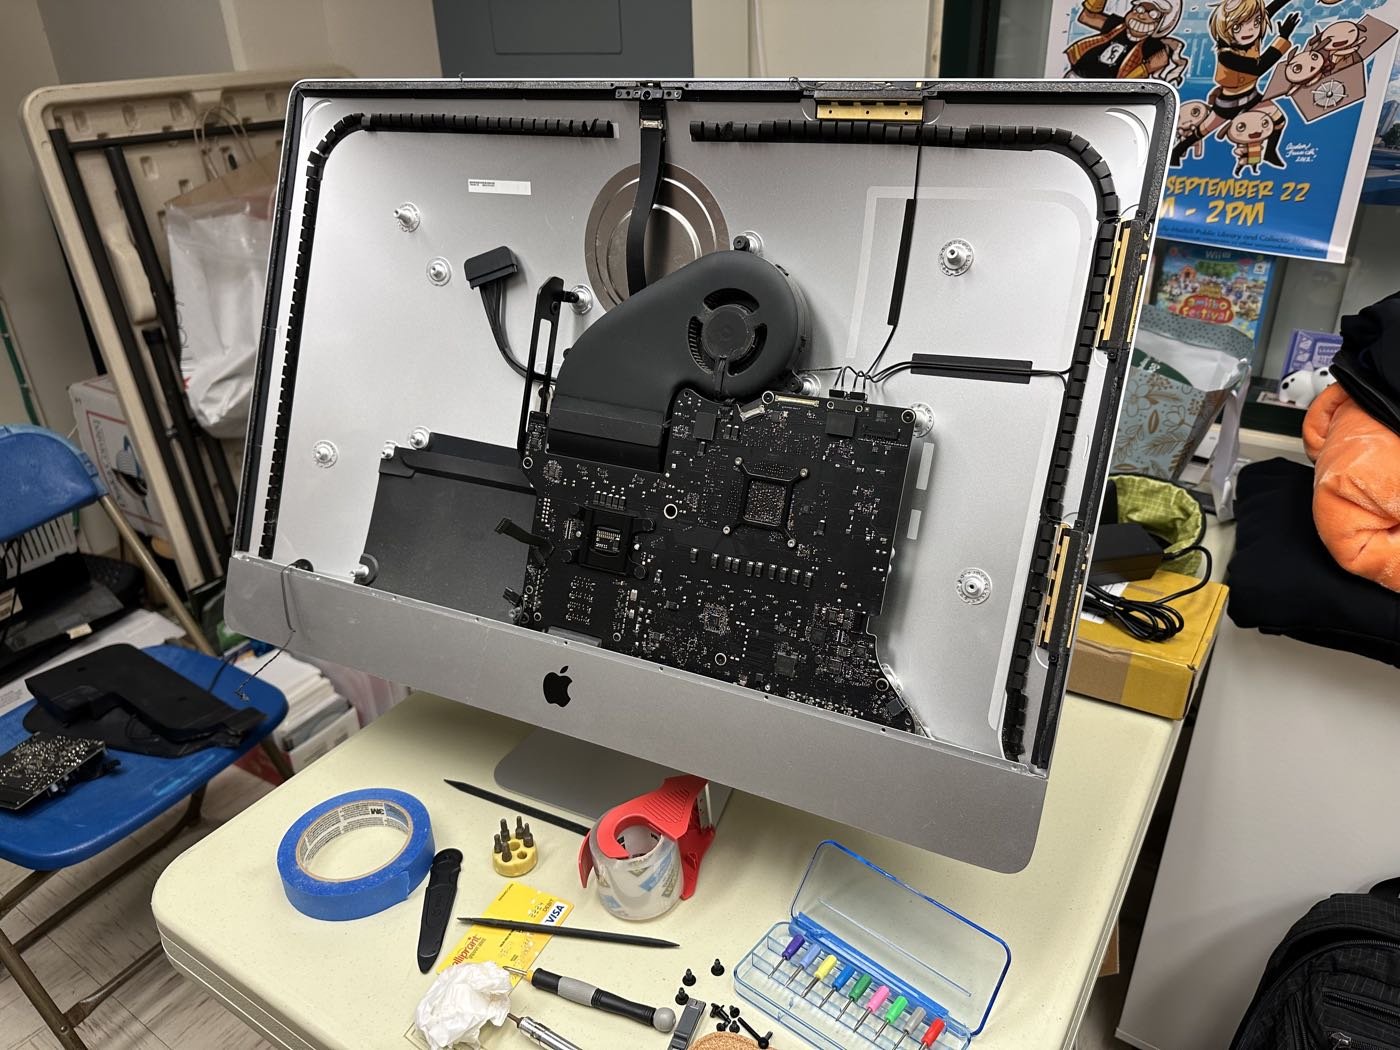 Inside view of the iMac